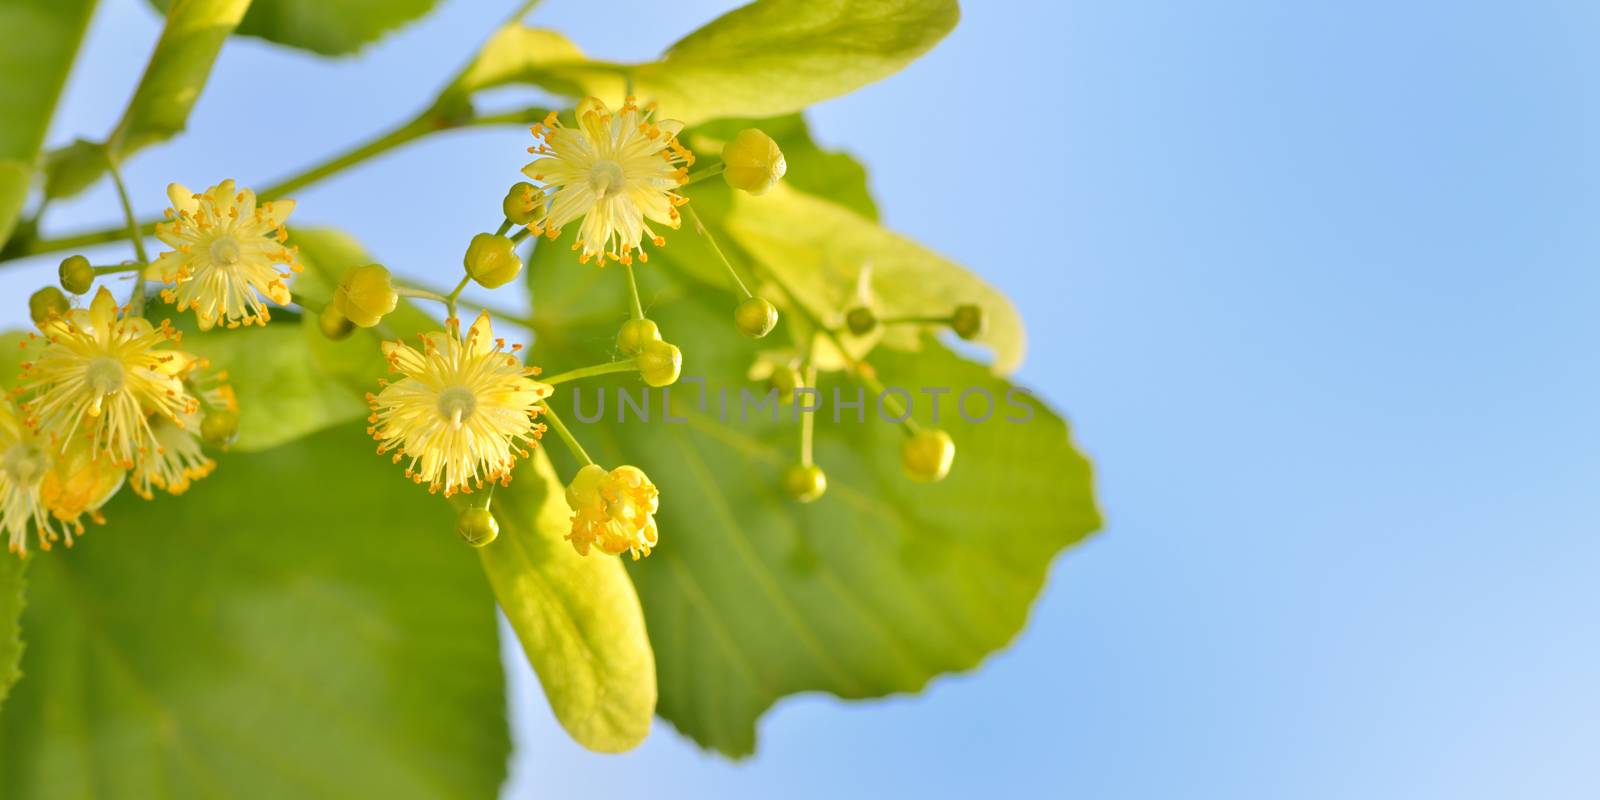 Branch of lime flowers in garden on sky background, close up